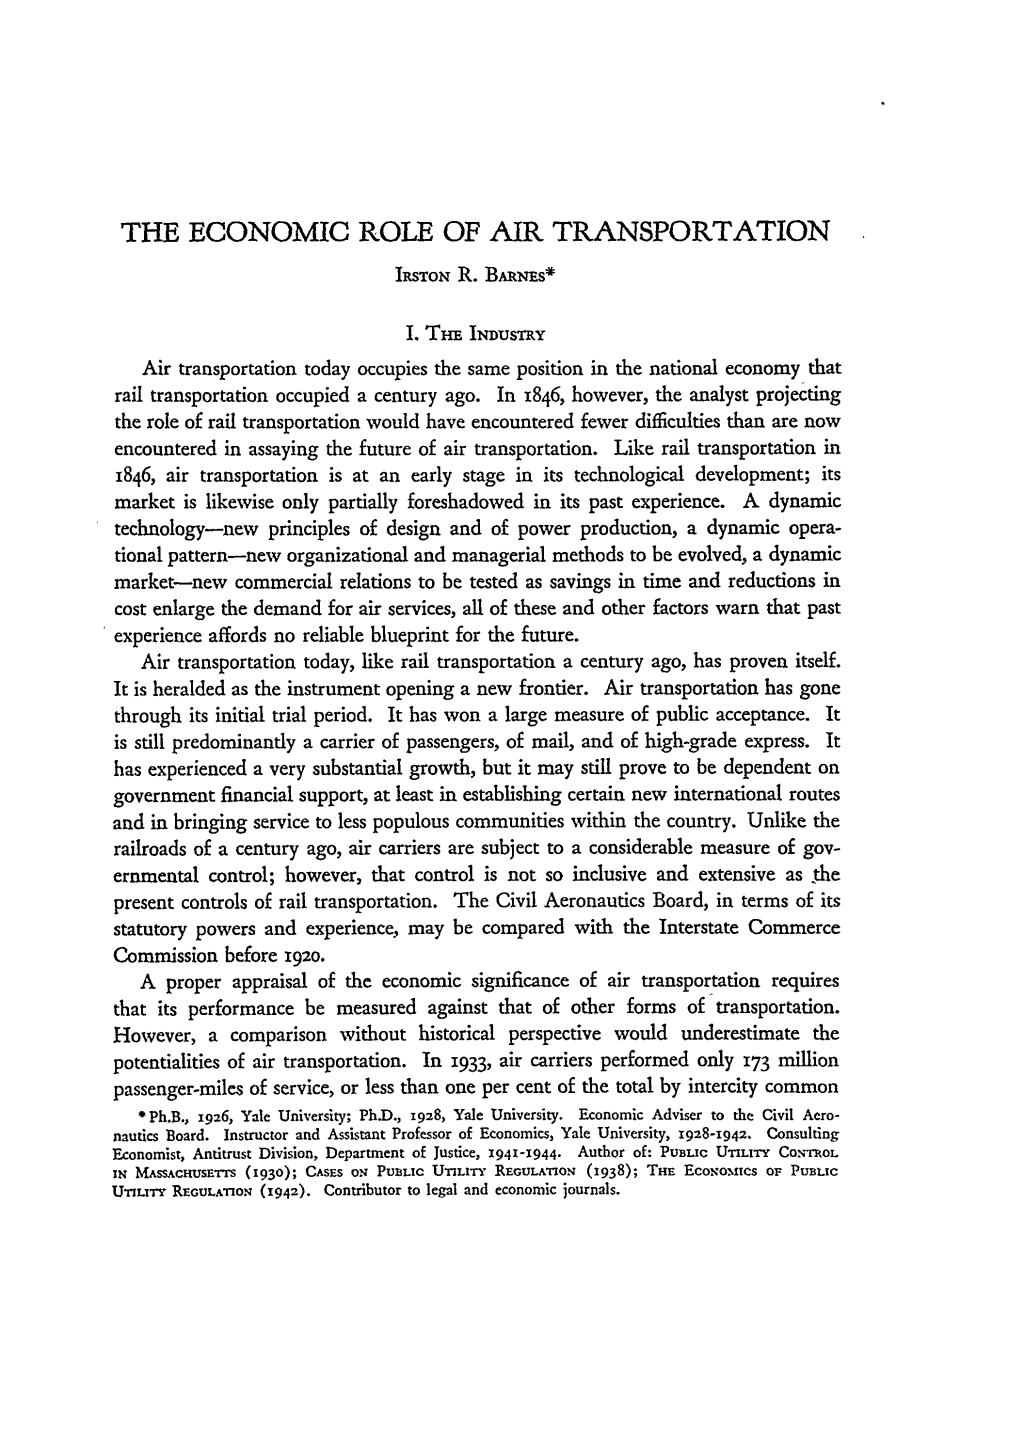 THE ECONOMIC ROLE of AIR TRANSPORTATION Isv.On R